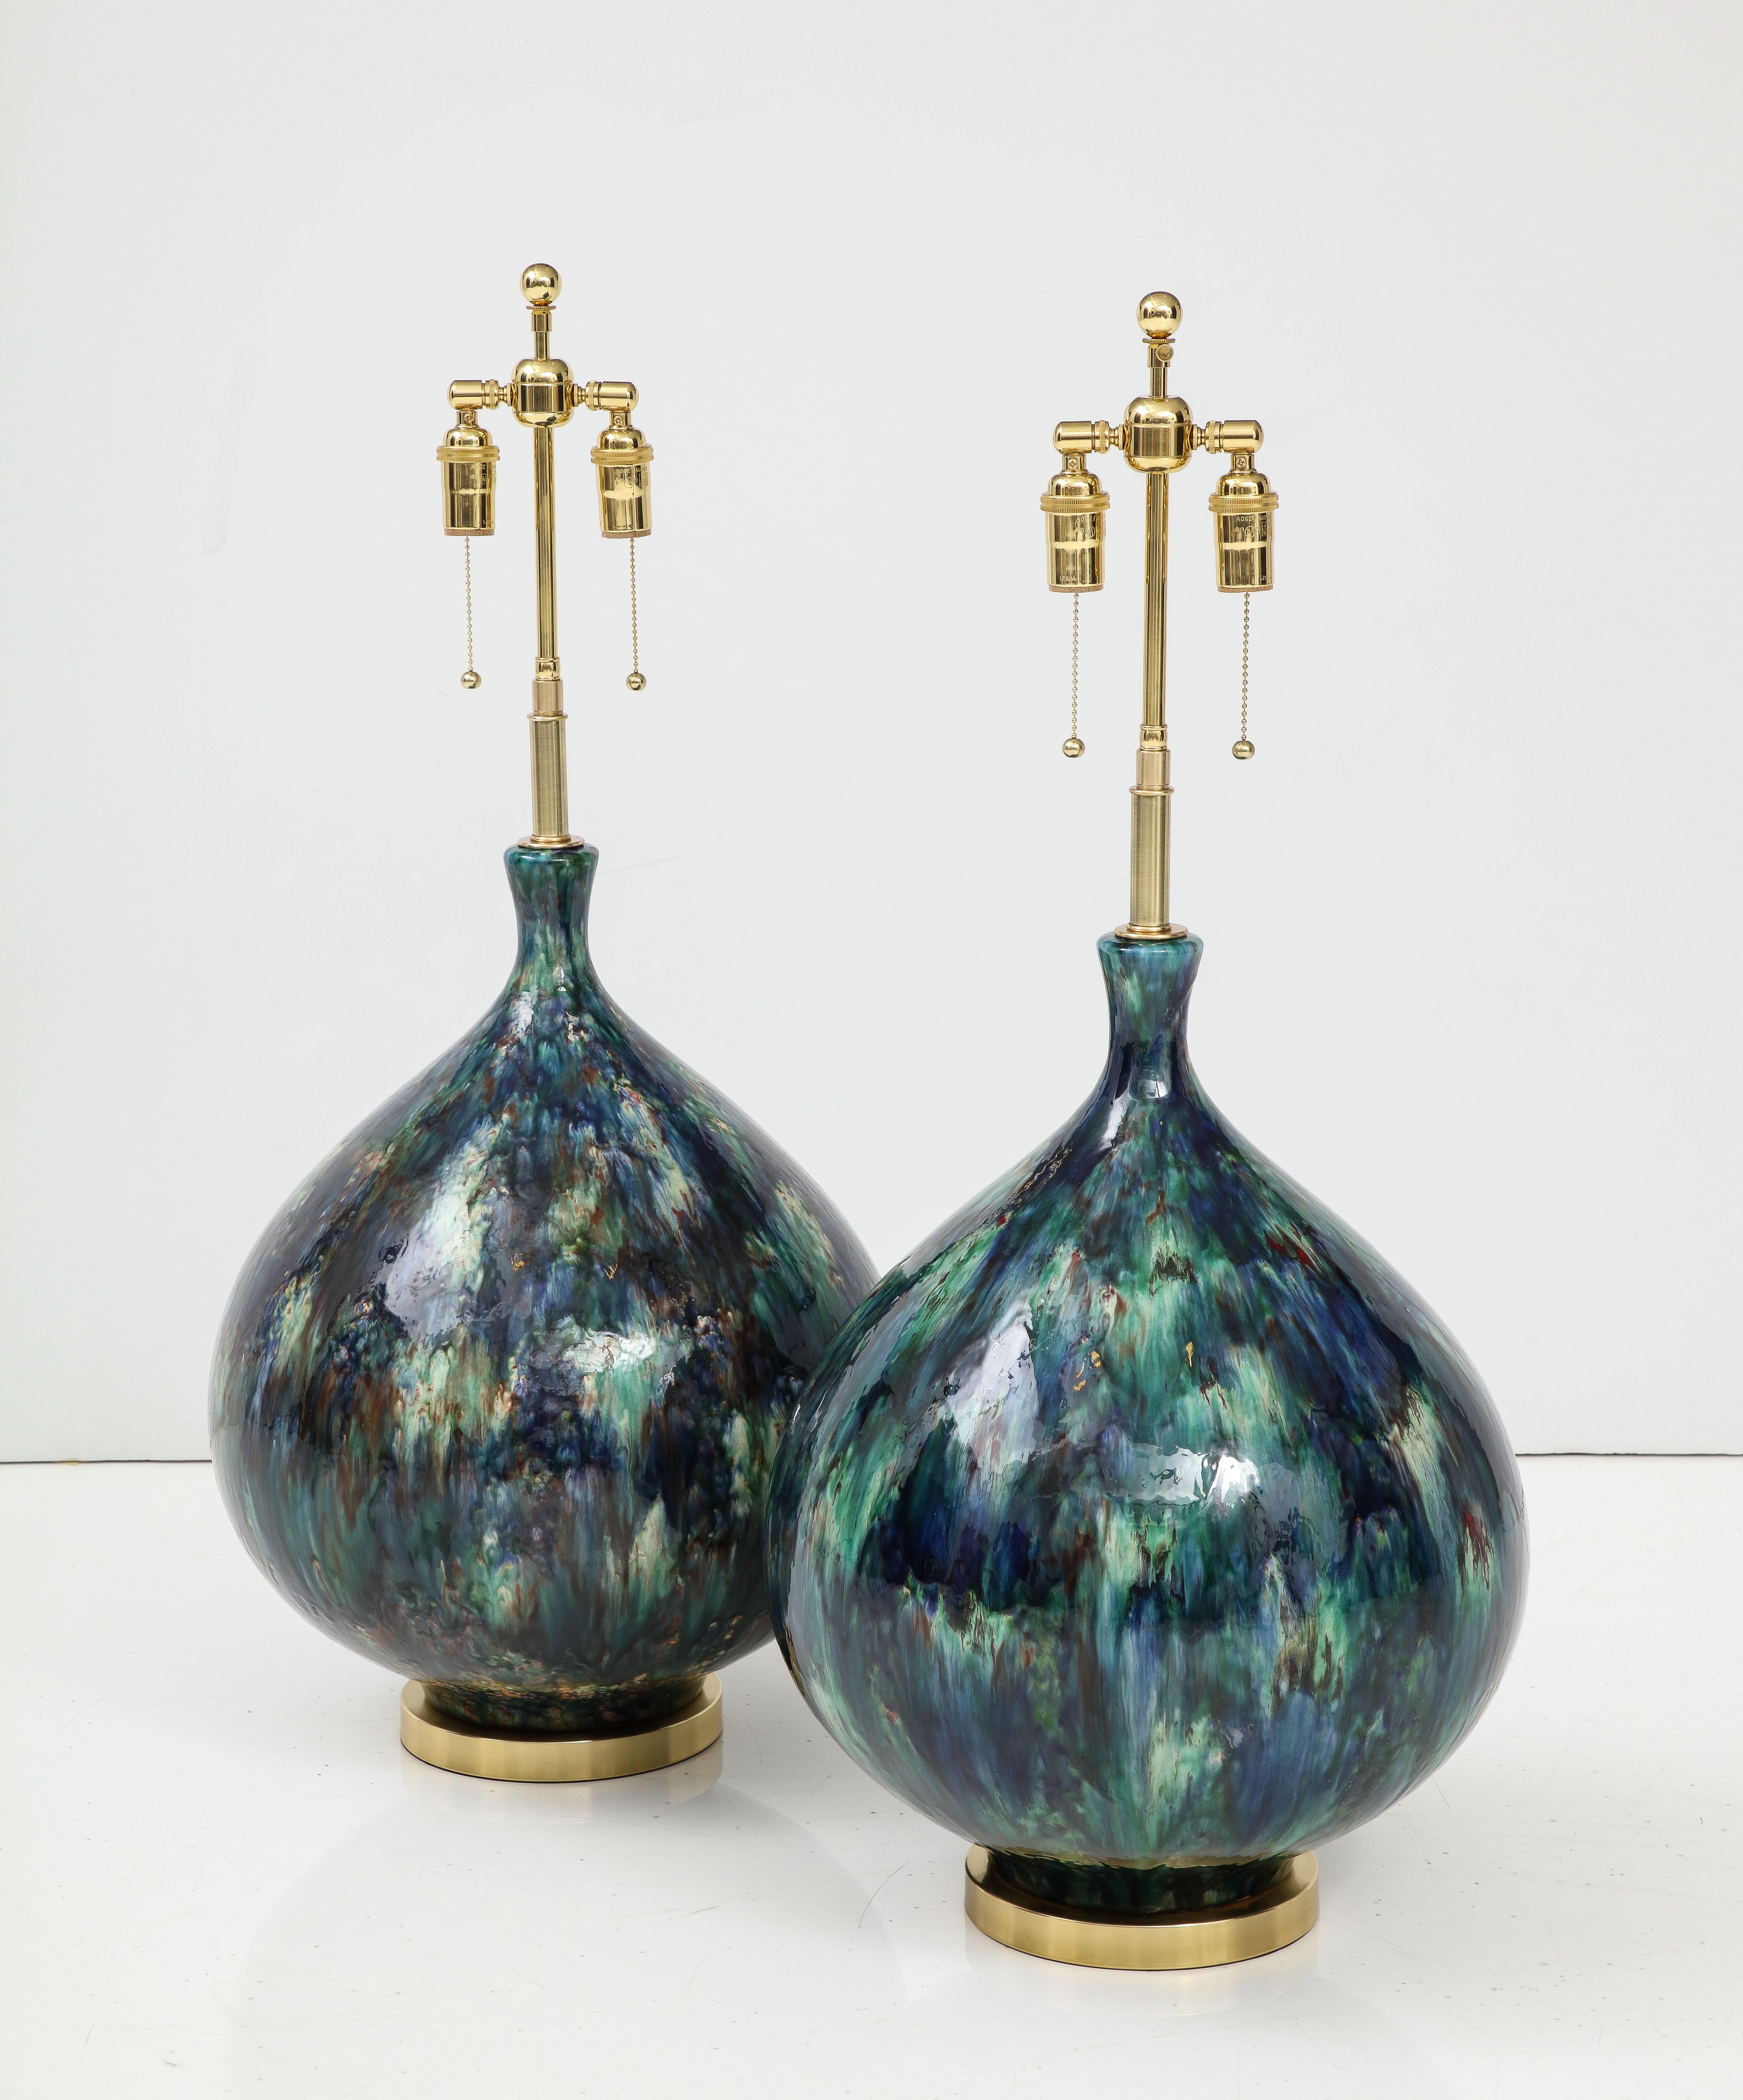 Giant pair of Italian ceramic lamps with a stunning glaze.
The lamps have been Newly rewired with adjustable  polished brass
double clusters that take standard size light bulbs.
The height to the top of the ceramic is 22